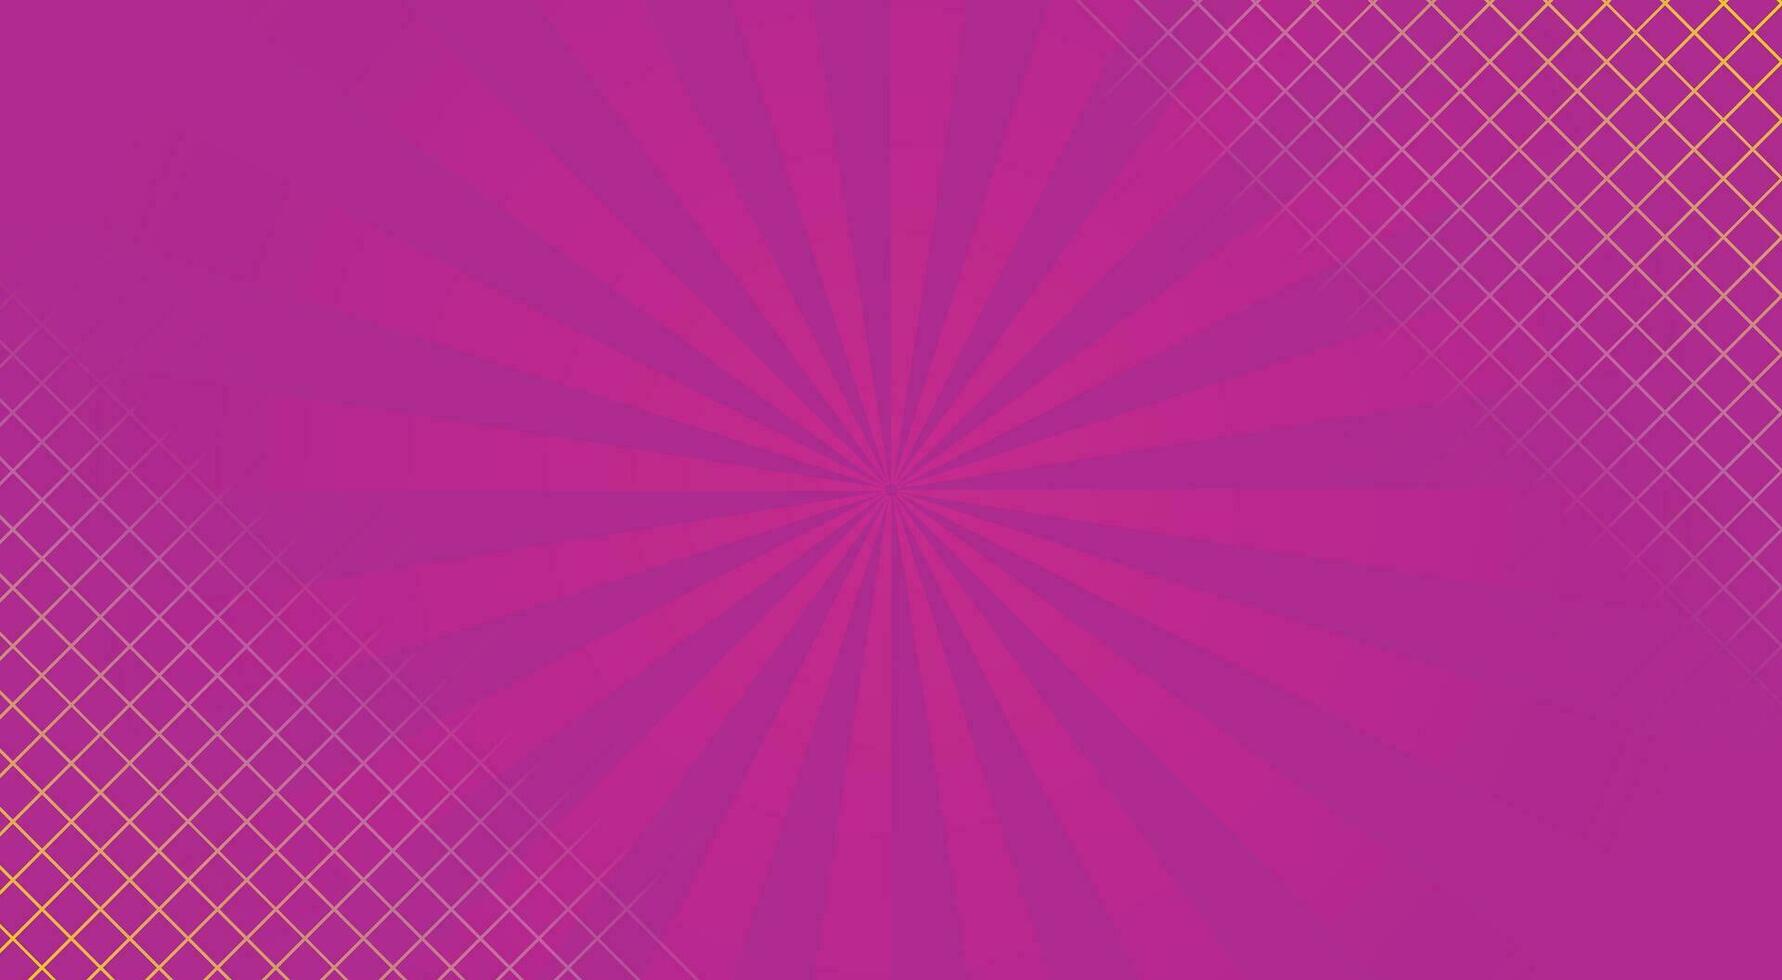 Violet abstract bakground with comic style design concept vector